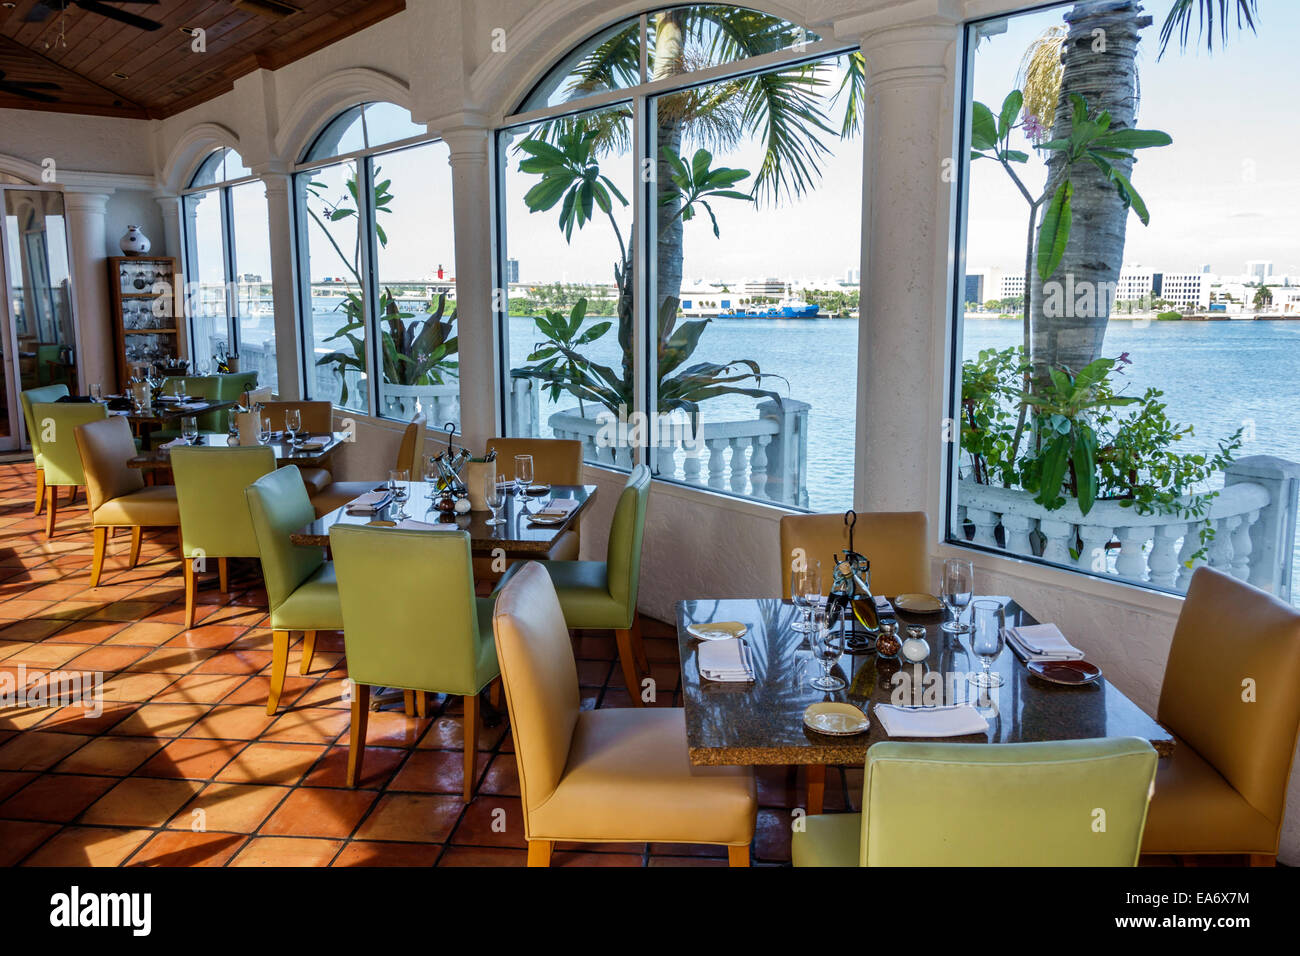 Miami Florida,Intercontinental,hotel,Blue Water Cafe,interior inside,tables,restaurant restaurants food dining cafe cafes,Biscayne Bay,view,FL14080801 Stock Photo